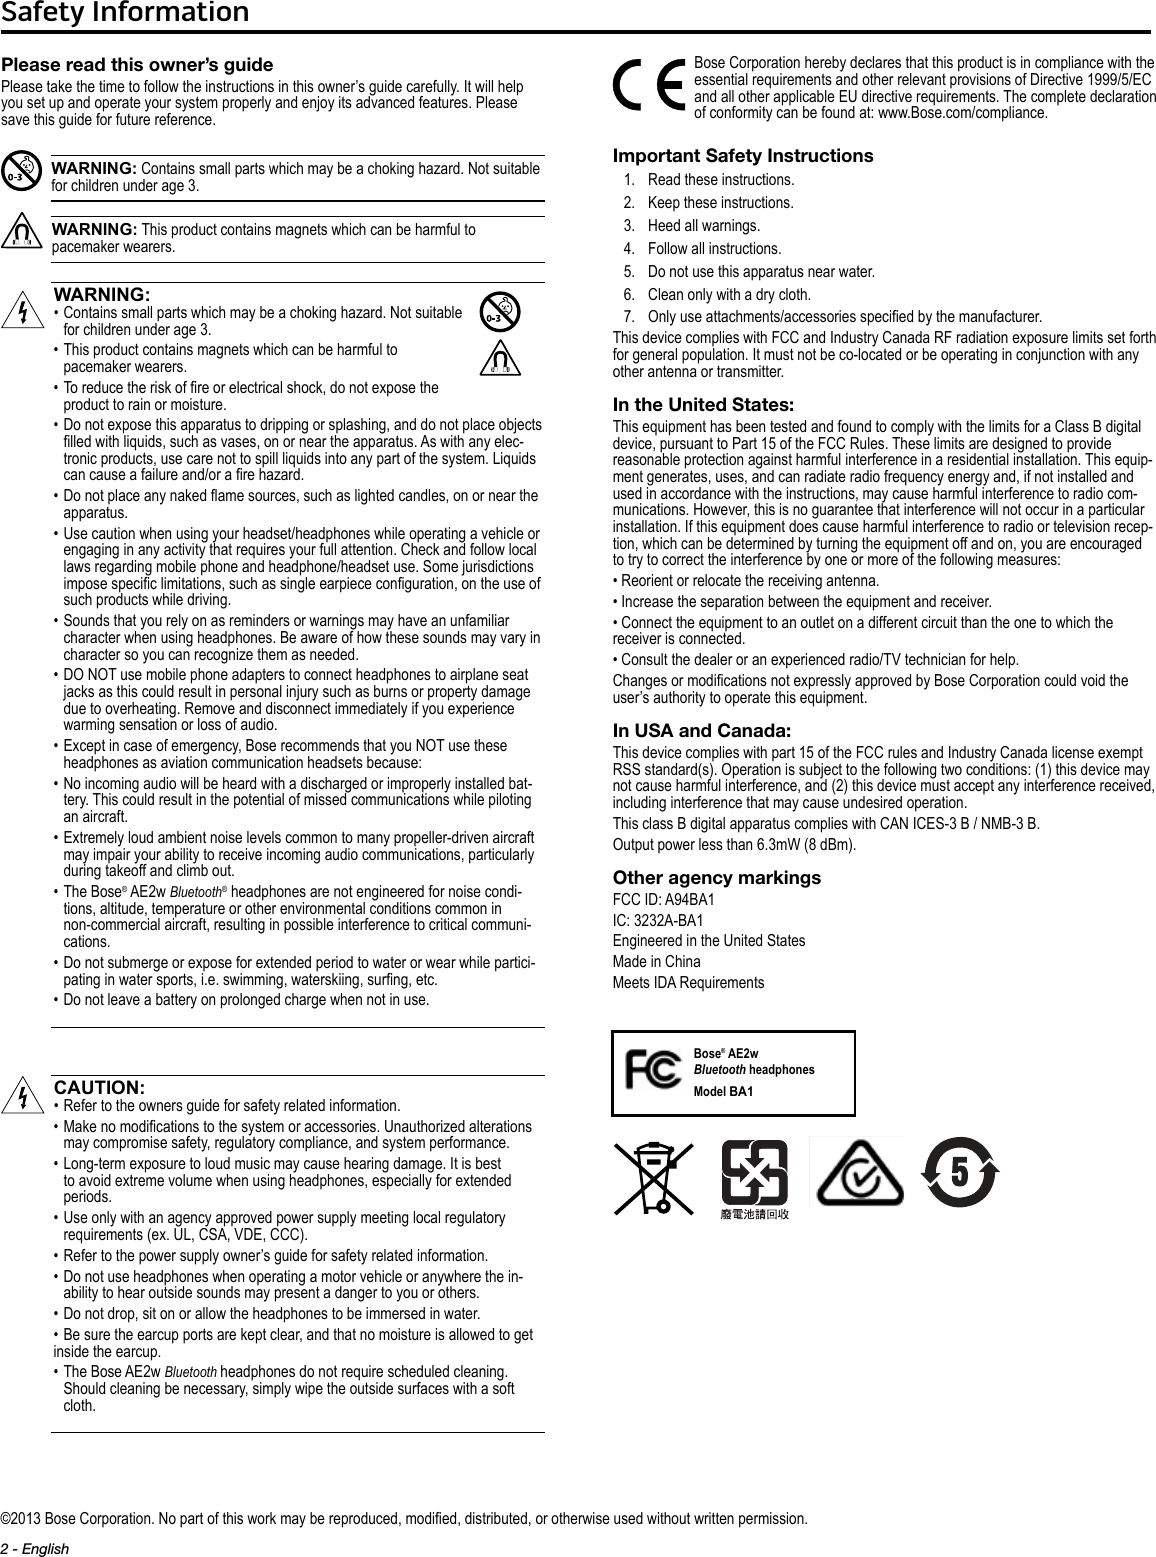 2 - EnglishSafety Information©2013 Bose Corporation. No part of this work may be reproduced, modied, distributed, or otherwise used without written permission.Please read this owner’s guidePlease take the time to follow the instructions in this owner’s guide carefully. It will help you set up and operate your system properly and enjoy its advanced features. Please save this guide for future reference.WARNING: Contains small parts which may be a choking hazard. Not suitable for children under age 3.WARNING: This product contains magnets which can be harmful to pacemaker wearers.WARNING:•  Contains small parts which may be a choking hazard. Not suitable  for children under age 3.•  This product contains magnets which can be harmful to  pacemaker wearers.•  To reduce the risk of re or electrical shock, do not expose the product to rain or moisture.•  Do not expose this apparatus to dripping or splashing, and do not place objects lled with liquids, such as vases, on or near the apparatus. As with any elec-tronic products, use care not to spill liquids into any part of the system. Liquids can cause a failure and/or a re hazard.•   Do not place any naked ame sources, such as lighted candles, on or near the apparatus.•  Use caution when using your headset/headphones while operating a vehicle or engaging in any activity that requires your full attention. Check and follow local laws regarding mobile phone and headphone/headset use. Some jurisdictions impose specic limitations, such as single earpiece conguration, on the use of such products while driving.•  Sounds that you rely on as reminders or warnings may have an unfamiliar character when using headphones. Be aware of how these sounds may vary in character so you can recognize them as needed.•  DO NOT use mobile phone adapters to connect headphones to airplane seat jacks as this could result in personal injury such as burns or property damage due to overheating. Remove and disconnect immediately if you experience warming sensation or loss of audio.•  Except in case of emergency, Bose recommends that you NOT use these headphones as aviation communication headsets because:•  No incoming audio will be heard with a discharged or improperly installed bat-tery. This could result in the potential of missed communications while piloting an aircraft.•  Extremely loud ambient noise levels common to many propeller-driven aircraft may impair your ability to receive incoming audio communications, particularly during takeoff and climb out.•  The  Bose® AE2w Bluetooth® headphones are not engineered for noise condi-tions, altitude, temperature or other environmental conditions common in non-commercial aircraft, resulting in possible interference to critical communi-cations.•  Do not submerge or expose for extended period to water or wear while partici-pating in water sports, i.e. swimming, waterskiing, surng, etc.• Do not leave a battery on prolonged charge when not in use.CAUTION:•  Refer to the owners guide for safety related information.•  Make no modications to the system or accessories. Unauthorized alterations may compromise safety, regulatory compliance, and system performance.•  Long-term exposure to loud music may cause hearing damage. It is best to avoid extreme volume when using headphones, especially for extended periods.•  Use only with an agency approved power supply meeting local regulatory requirements (ex. UL, CSA, VDE, CCC).• Refer to the power supply owner’s guide for safety related information.•  Do not use headphones when operating a motor vehicle or anywhere the in-ability to hear outside sounds may present a danger to you or others.• Do not drop, sit on or allow the headphones to be immersed in water.• Be sure the earcup ports are kept clear, and that no moisture is allowed to get inside the earcup.•  The Bose AE2w Bluetooth headphones do not require scheduled cleaning. Should cleaning be necessary, simply wipe the outside surfaces with a soft cloth.Bose Corporation hereby declares that this product is in compliance with the essential requirements and other relevant provisions of Directive 1999/5/EC and all other applicable EU directive requirements. The complete declaration of conformity can be found at: www.Bose.com/compliance.Important Safety Instructions1.   Read these instructions.2.   Keep these instructions.3.   Heed all warnings.4.   Follow all instructions.5.   Do not use this apparatus near water.6.   Clean only with a dry cloth.7.   Only use attachments/accessories specied by the manufacturer.This device complies with FCC and Industry Canada RF radiation exposure limits set forth for general population. It must not be co-located or be operating in conjunction with any other antenna or transmitter.In the United States:This equipment has been tested and found to comply with the limits for a Class B digital device, pursuant to Part 15 of the FCC Rules. These limits are designed to provide reasonable protection against harmful interference in a residential installation. This equip-ment generates, uses, and can radiate radio frequency energy and, if not installed and used in accordance with the instructions, may cause harmful interference to radio com-munications. However, this is no guarantee that interference will not occur in a particular installation. If this equipment does cause harmful interference to radio or television recep-tion, which can be determined by turning the equipment off and on, you are encouraged to try to correct the interference by one or more of the following measures:• Reorient or relocate the receiving antenna.• Increase the separation between the equipment and receiver.• Connect the equipment to an outlet on a different circuit than the one to which the receiver is connected.• Consult the dealer or an experienced radio/TV technician for help.Changes or modications not expressly approved by Bose Corporation could void the user’s authority to operate this equipment.In USA and Canada:This device complies with part 15 of the FCC rules and Industry Canada license exempt RSS standard(s). Operation is subject to the following two conditions: (1) this device may not cause harmful interference, and (2) this device must accept any interference received, including interference that may cause undesired operation.This class B digital apparatus complies with CAN ICES-3 B / NMB-3 B.Output power less than 6.3mW (8 dBm).Other agency markingsFCC ID: A94BA1IC: 3232A-BA1Engineered in the United StatesMade in ChinaMeets IDA RequirementsBose® AE2w  Bluetooth headphonesModel BA1 XX